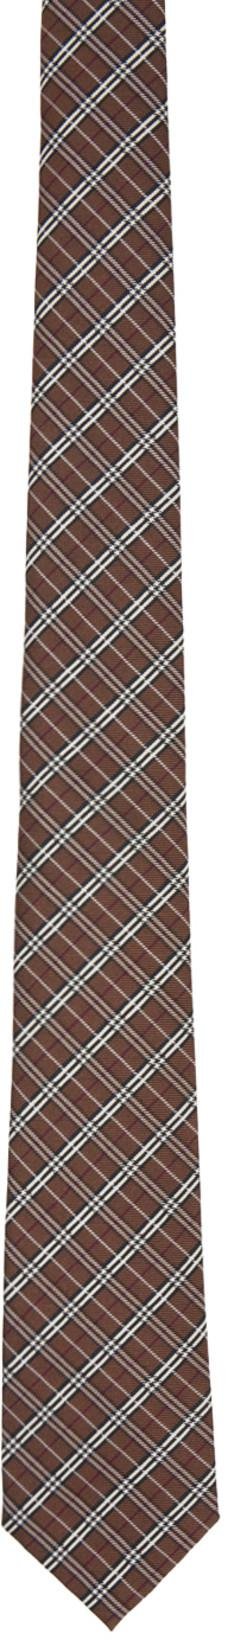 Brown Micro Check Tie by BURBERRY